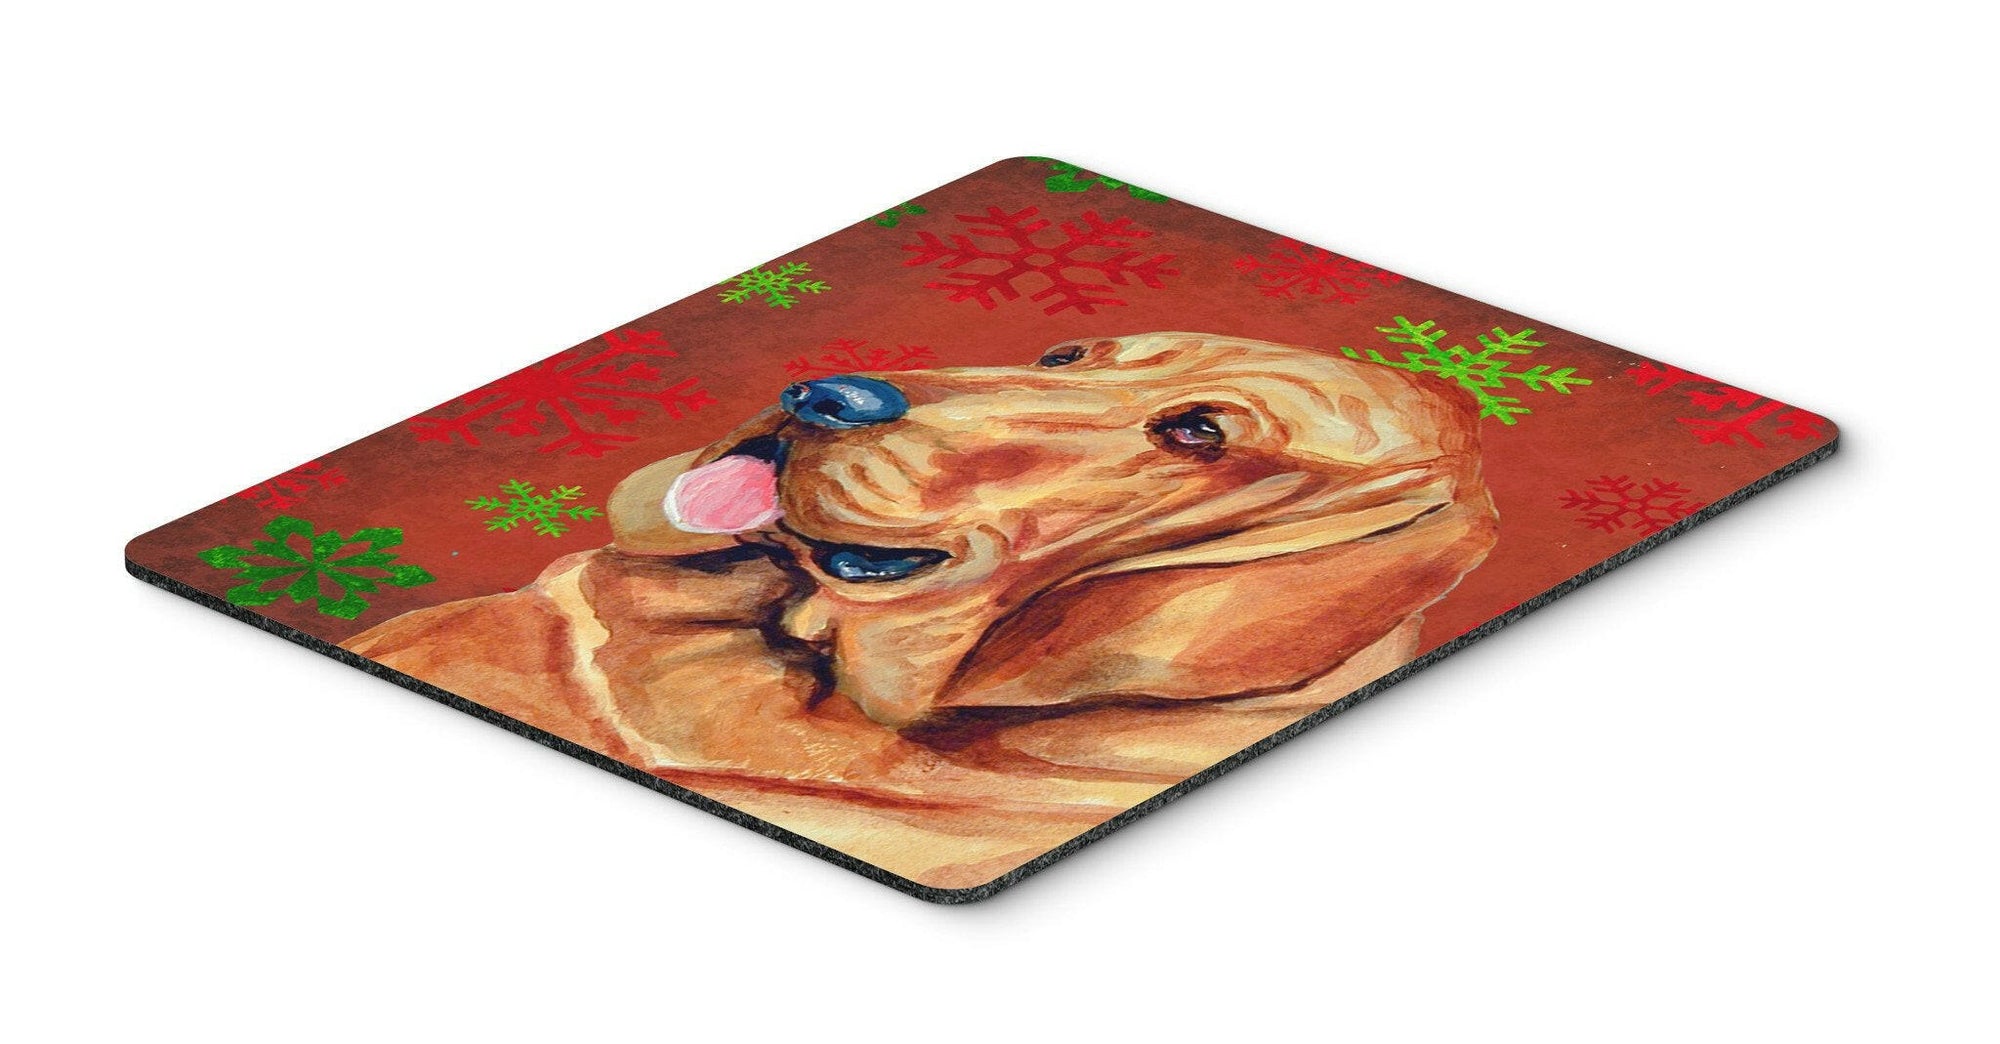 Bloodhound Red and Green Snowflakes Christmas Mouse Pad, Hot Pad or Trivet by Caroline's Treasures